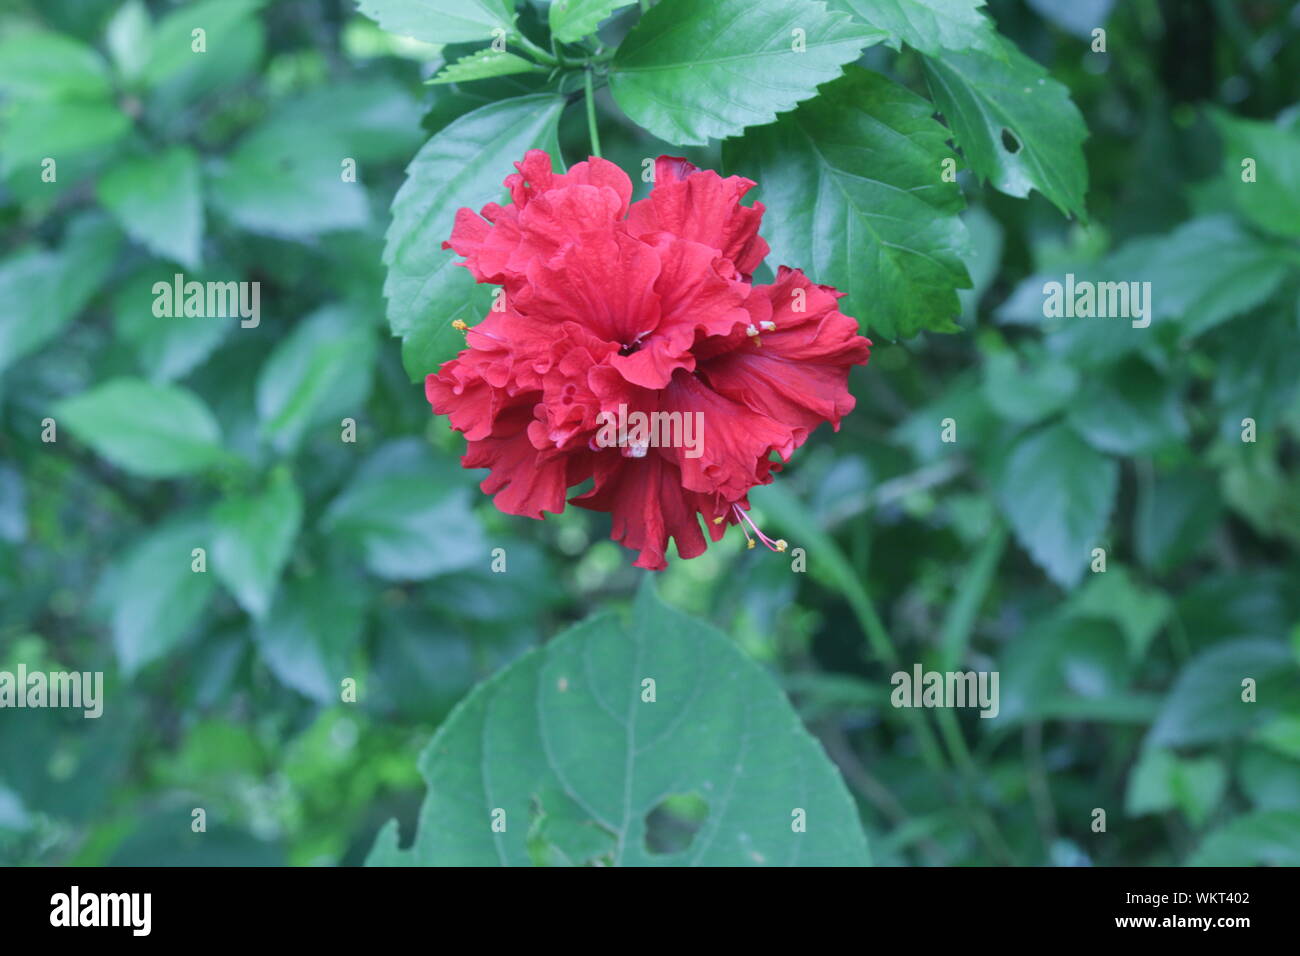 Natural jungle Flower Picture Background Stock Photo